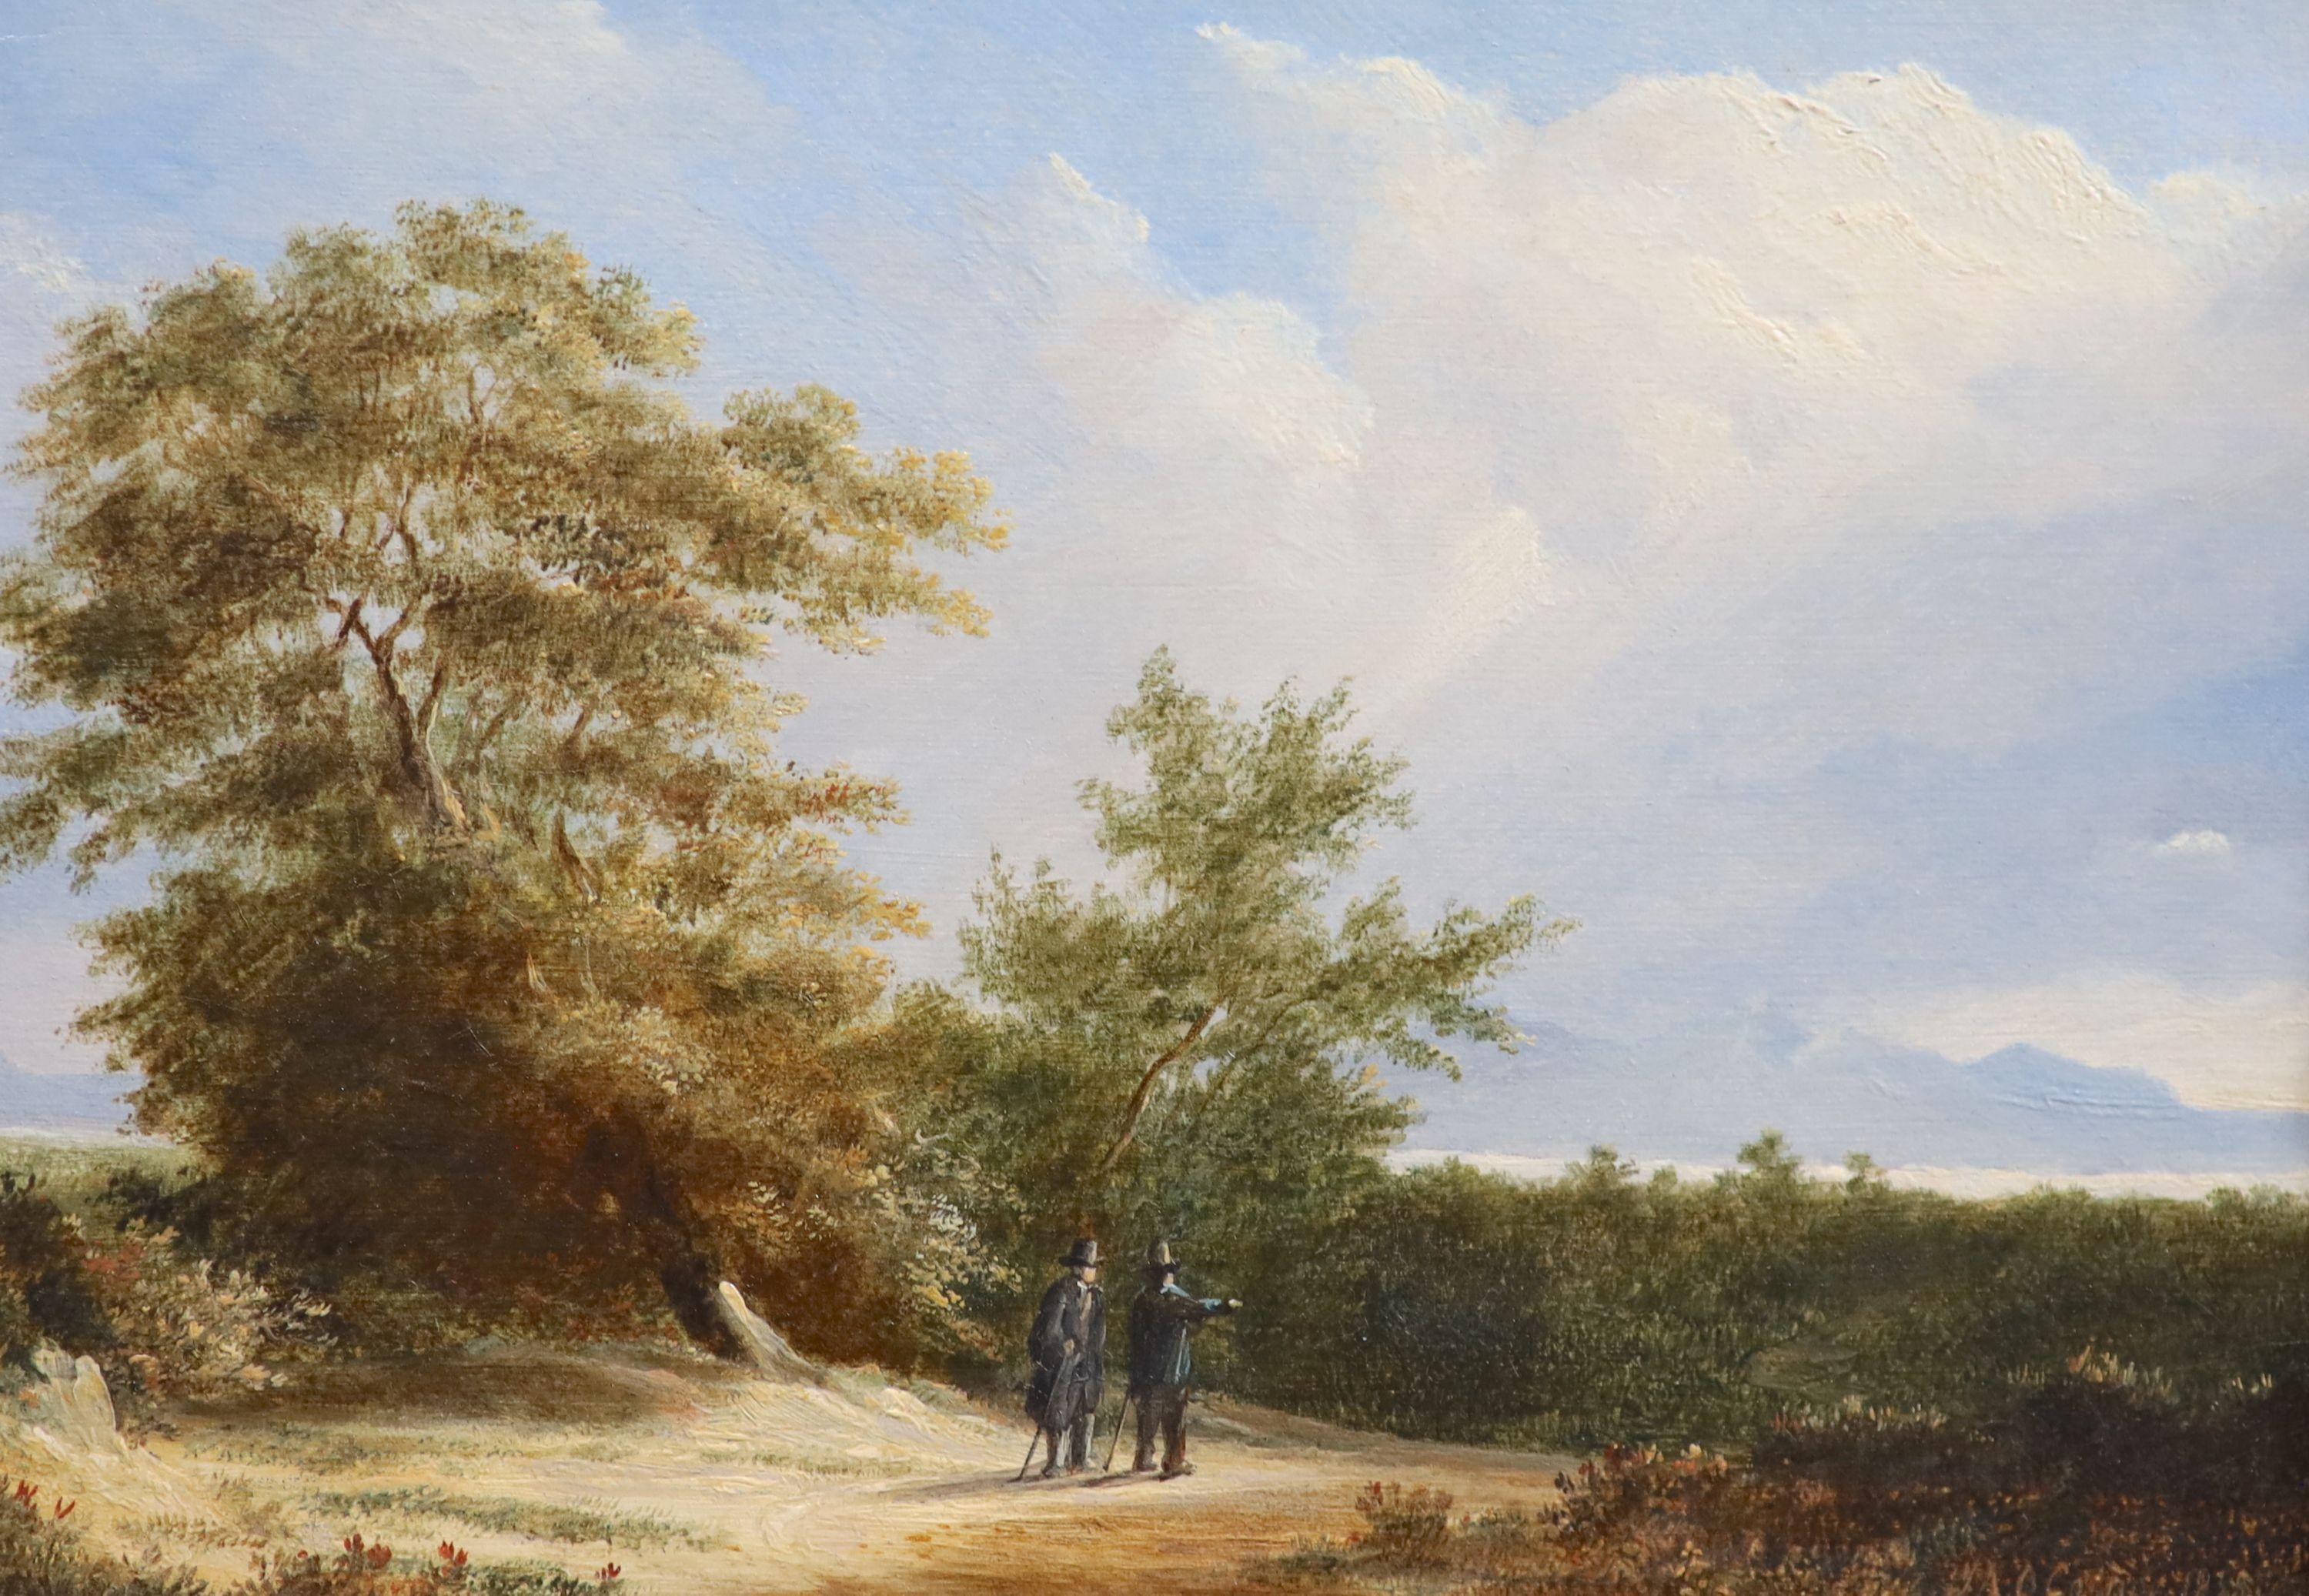 James Arthur O’Connor (Irish, 1792-1841), Travellers in landscapes, Oil on wooden panel, a pair, 14 x 19cm.